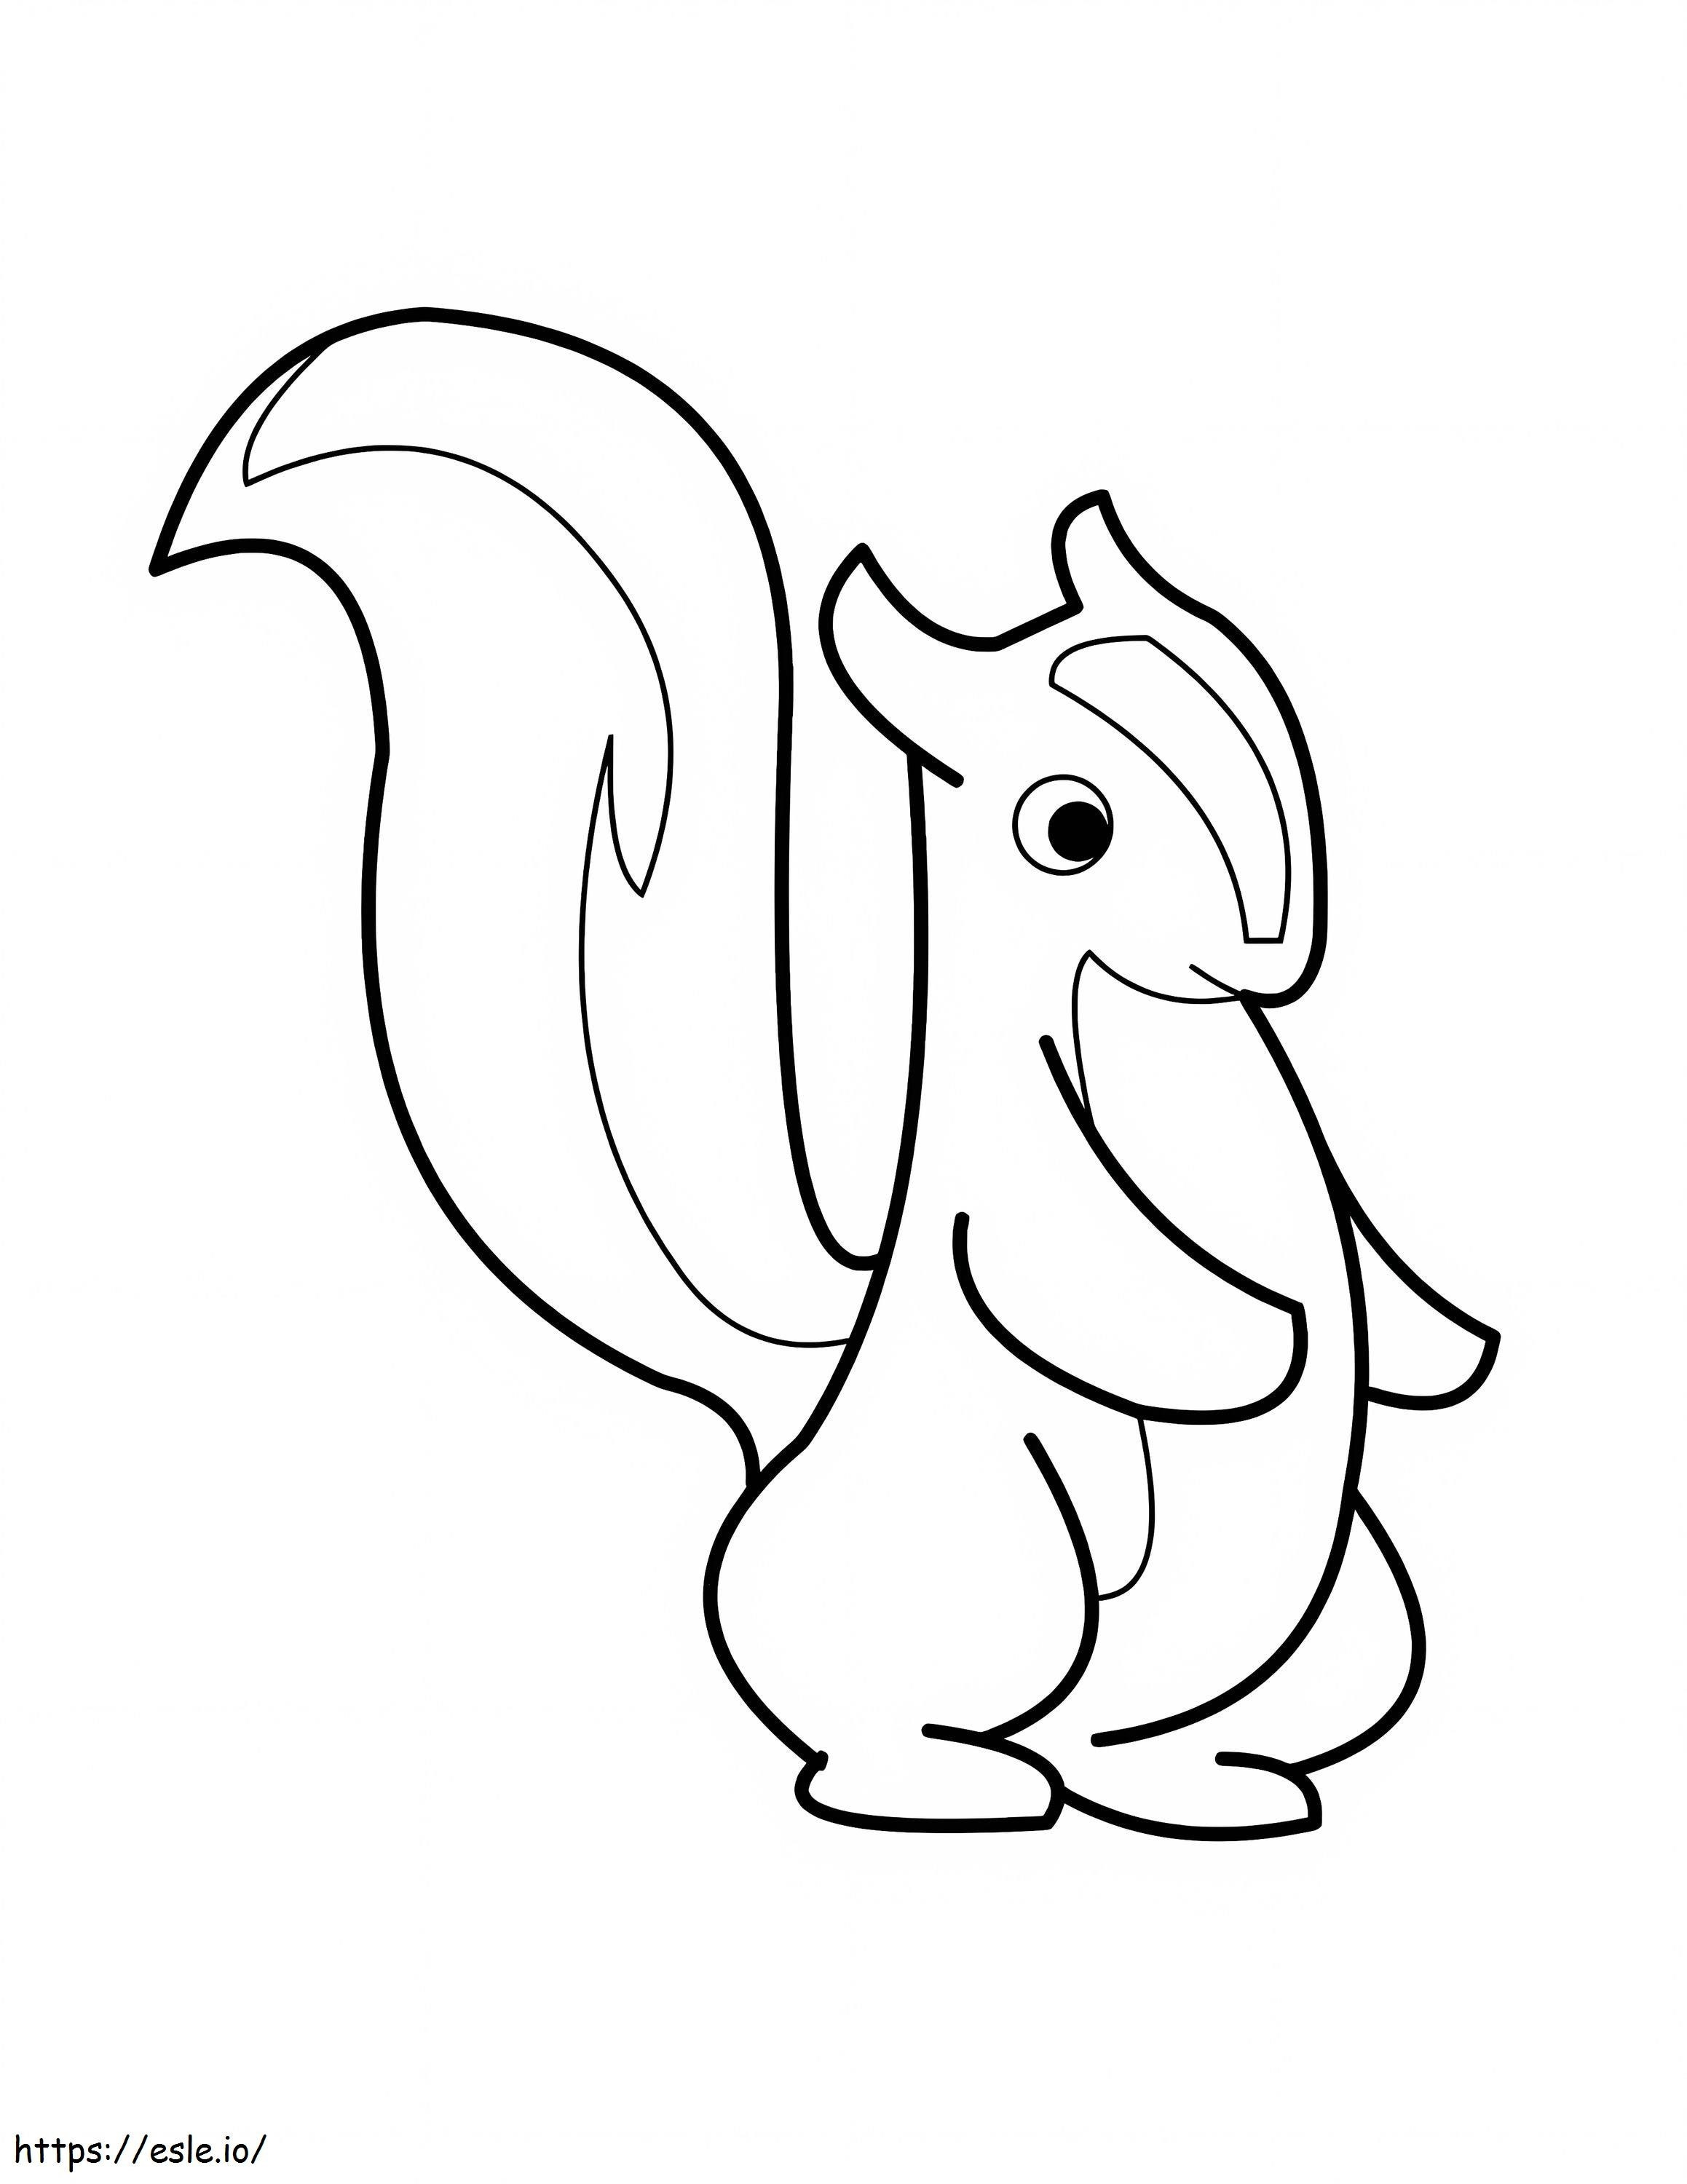 Basic Skunk coloring page